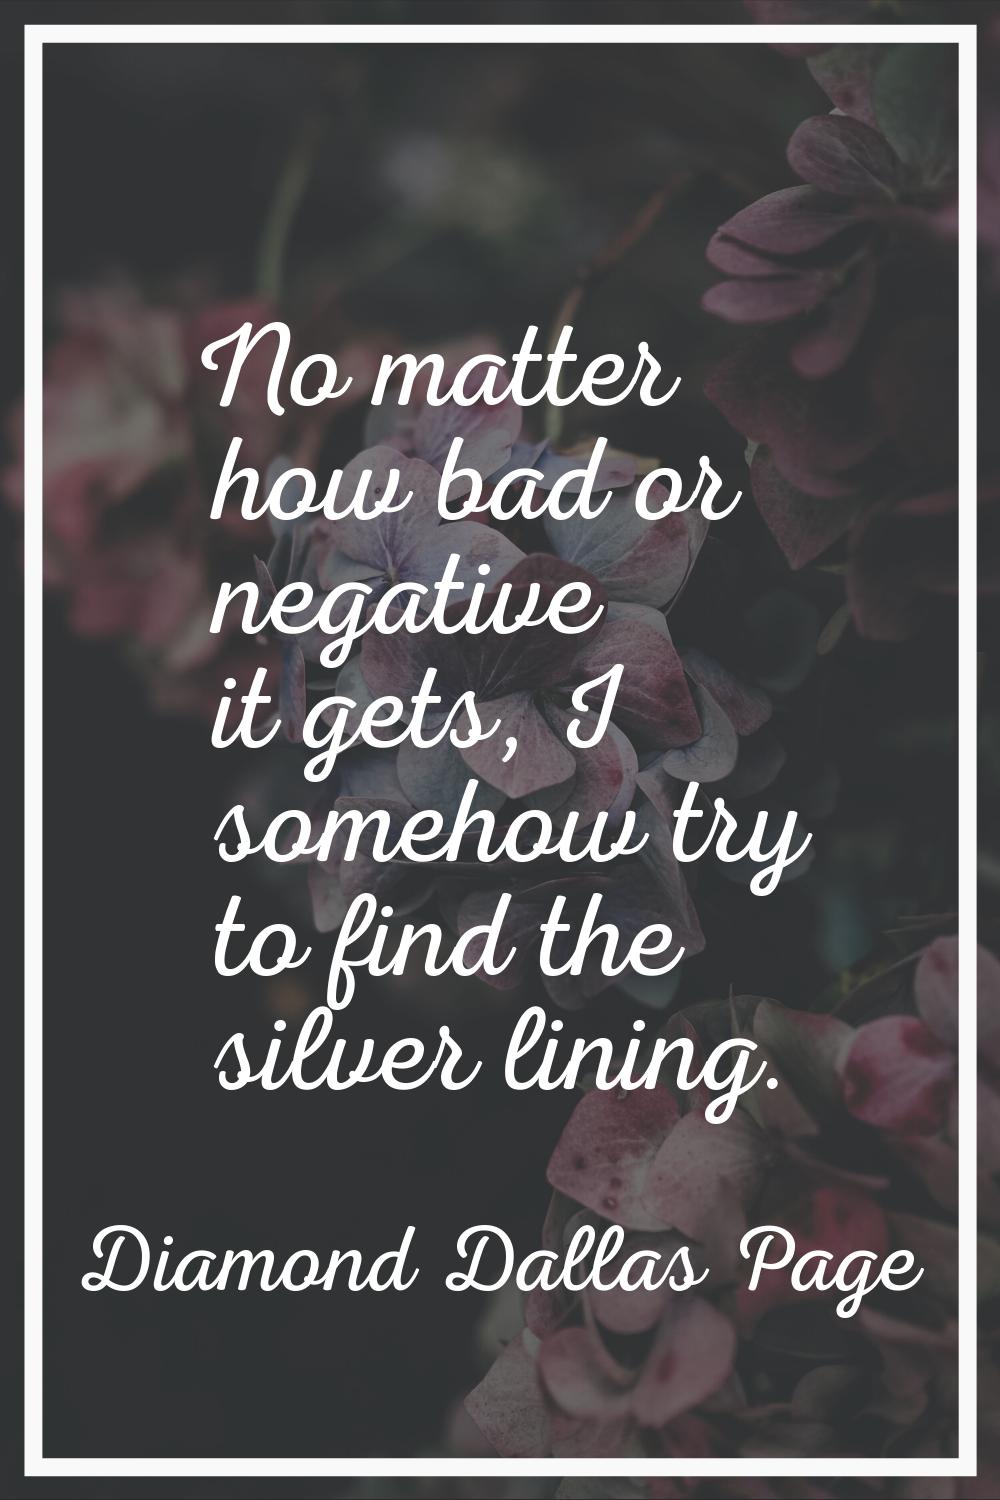 No matter how bad or negative it gets, I somehow try to find the silver lining.